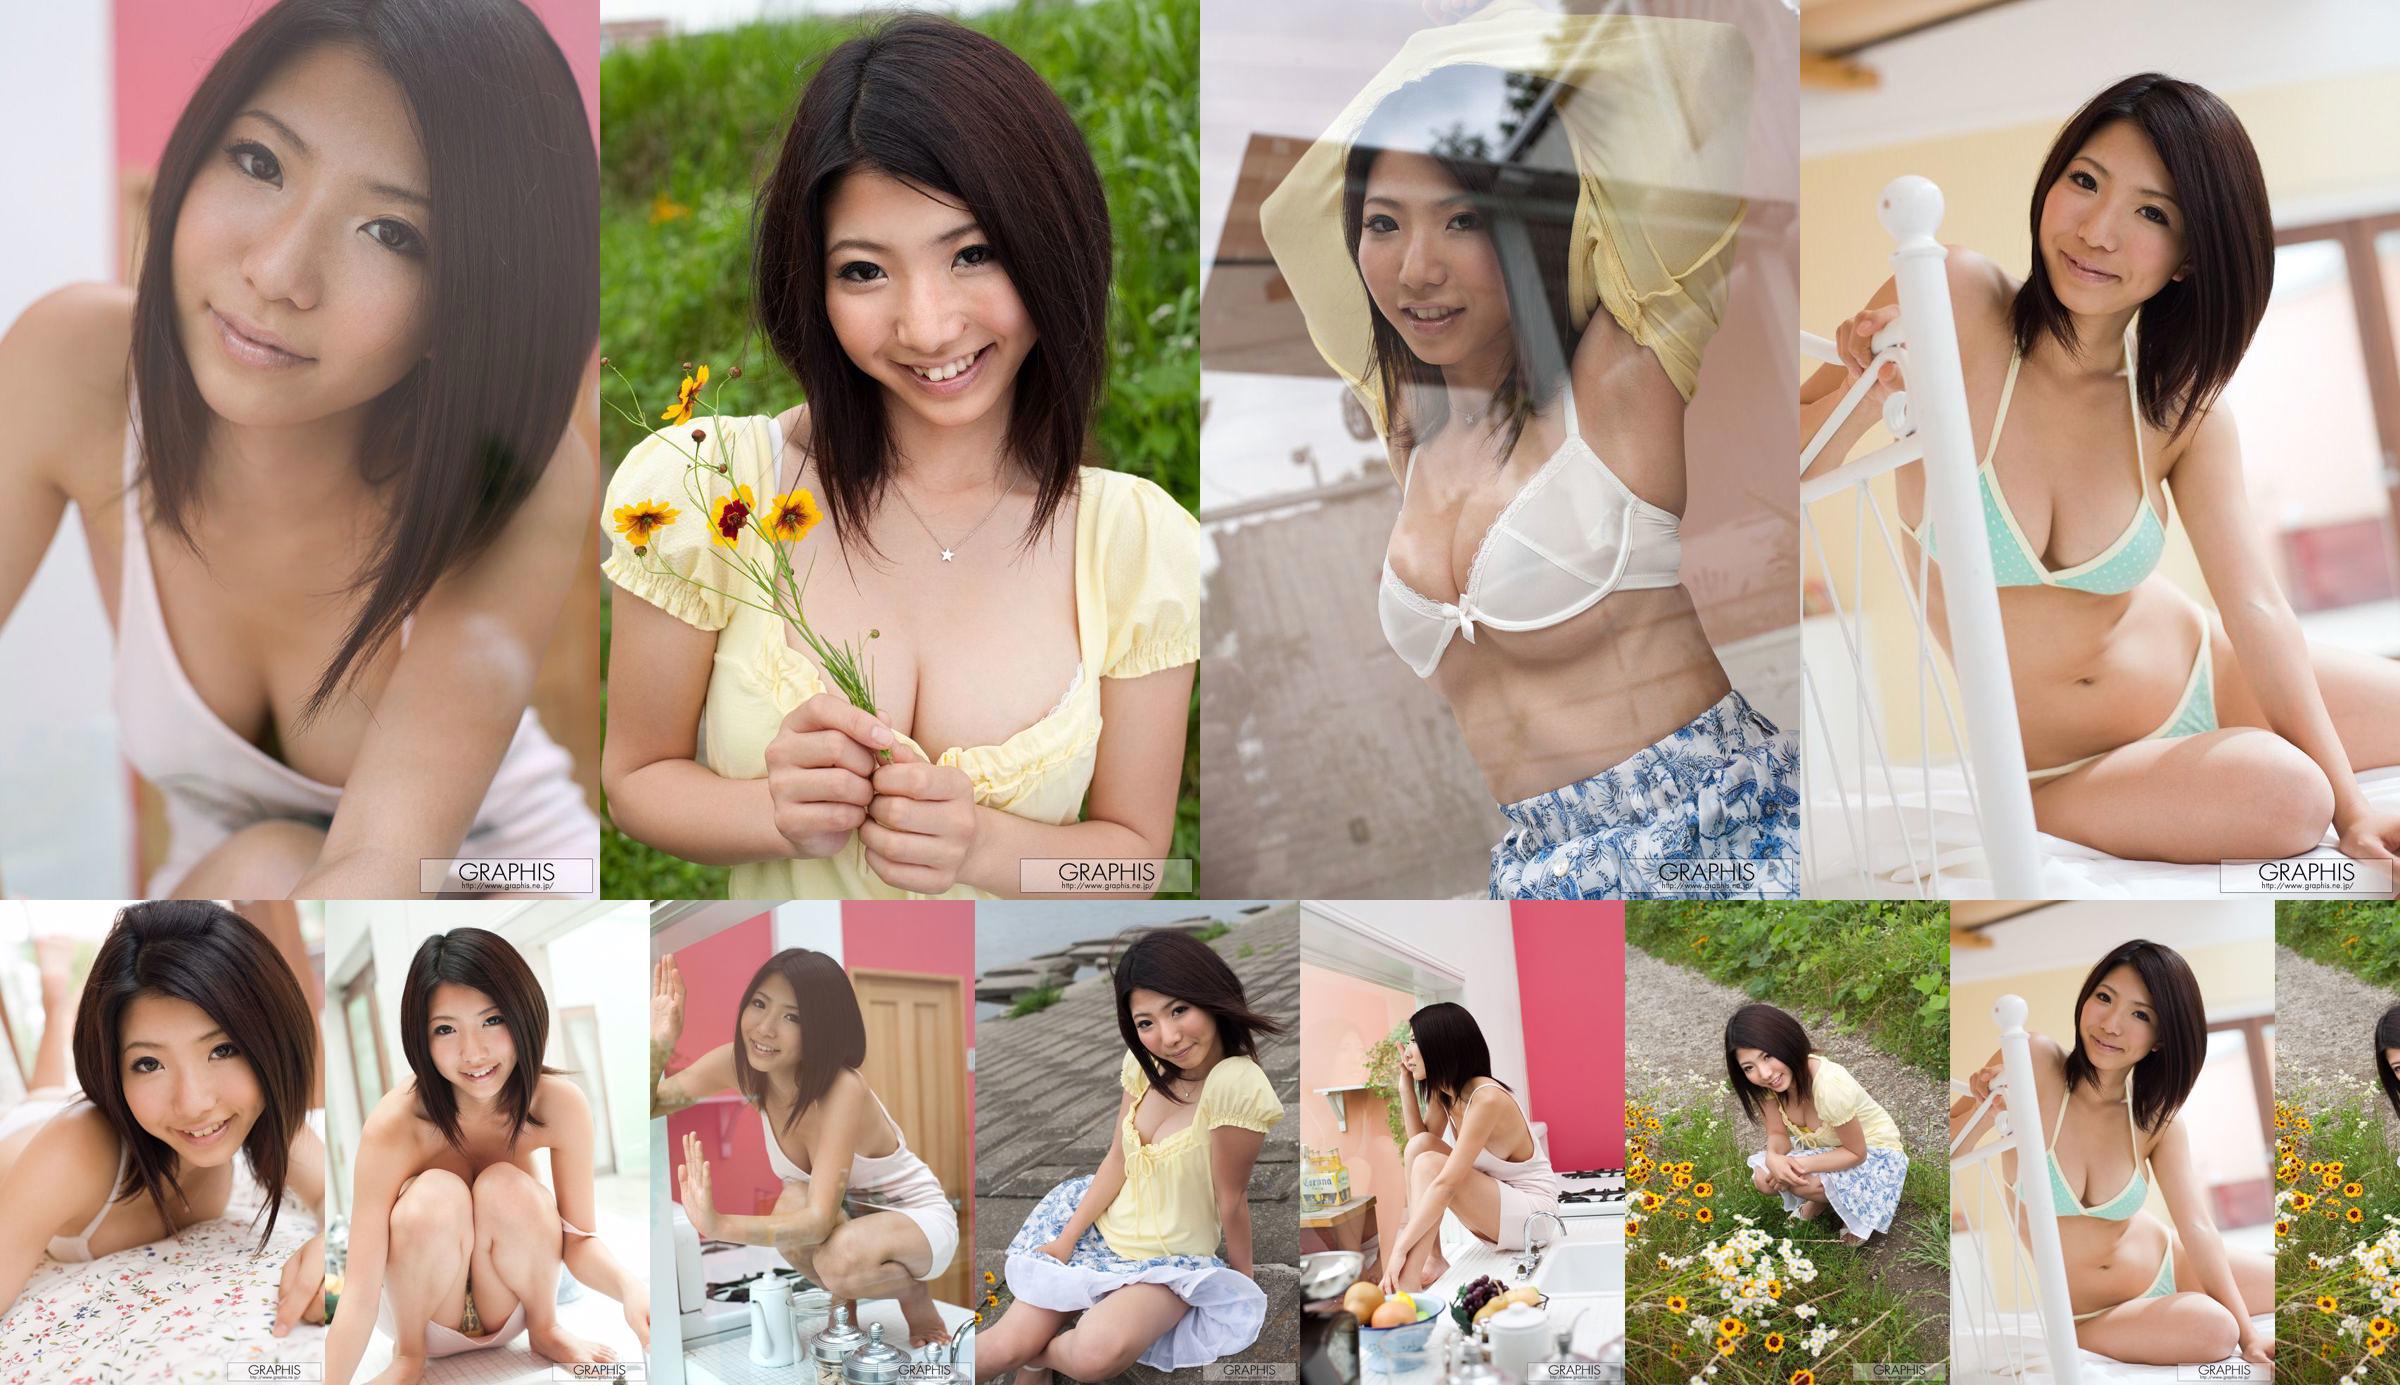 An Ann 《Simple and Innocent》 [Graphis] Gals No.025eeb Page 1